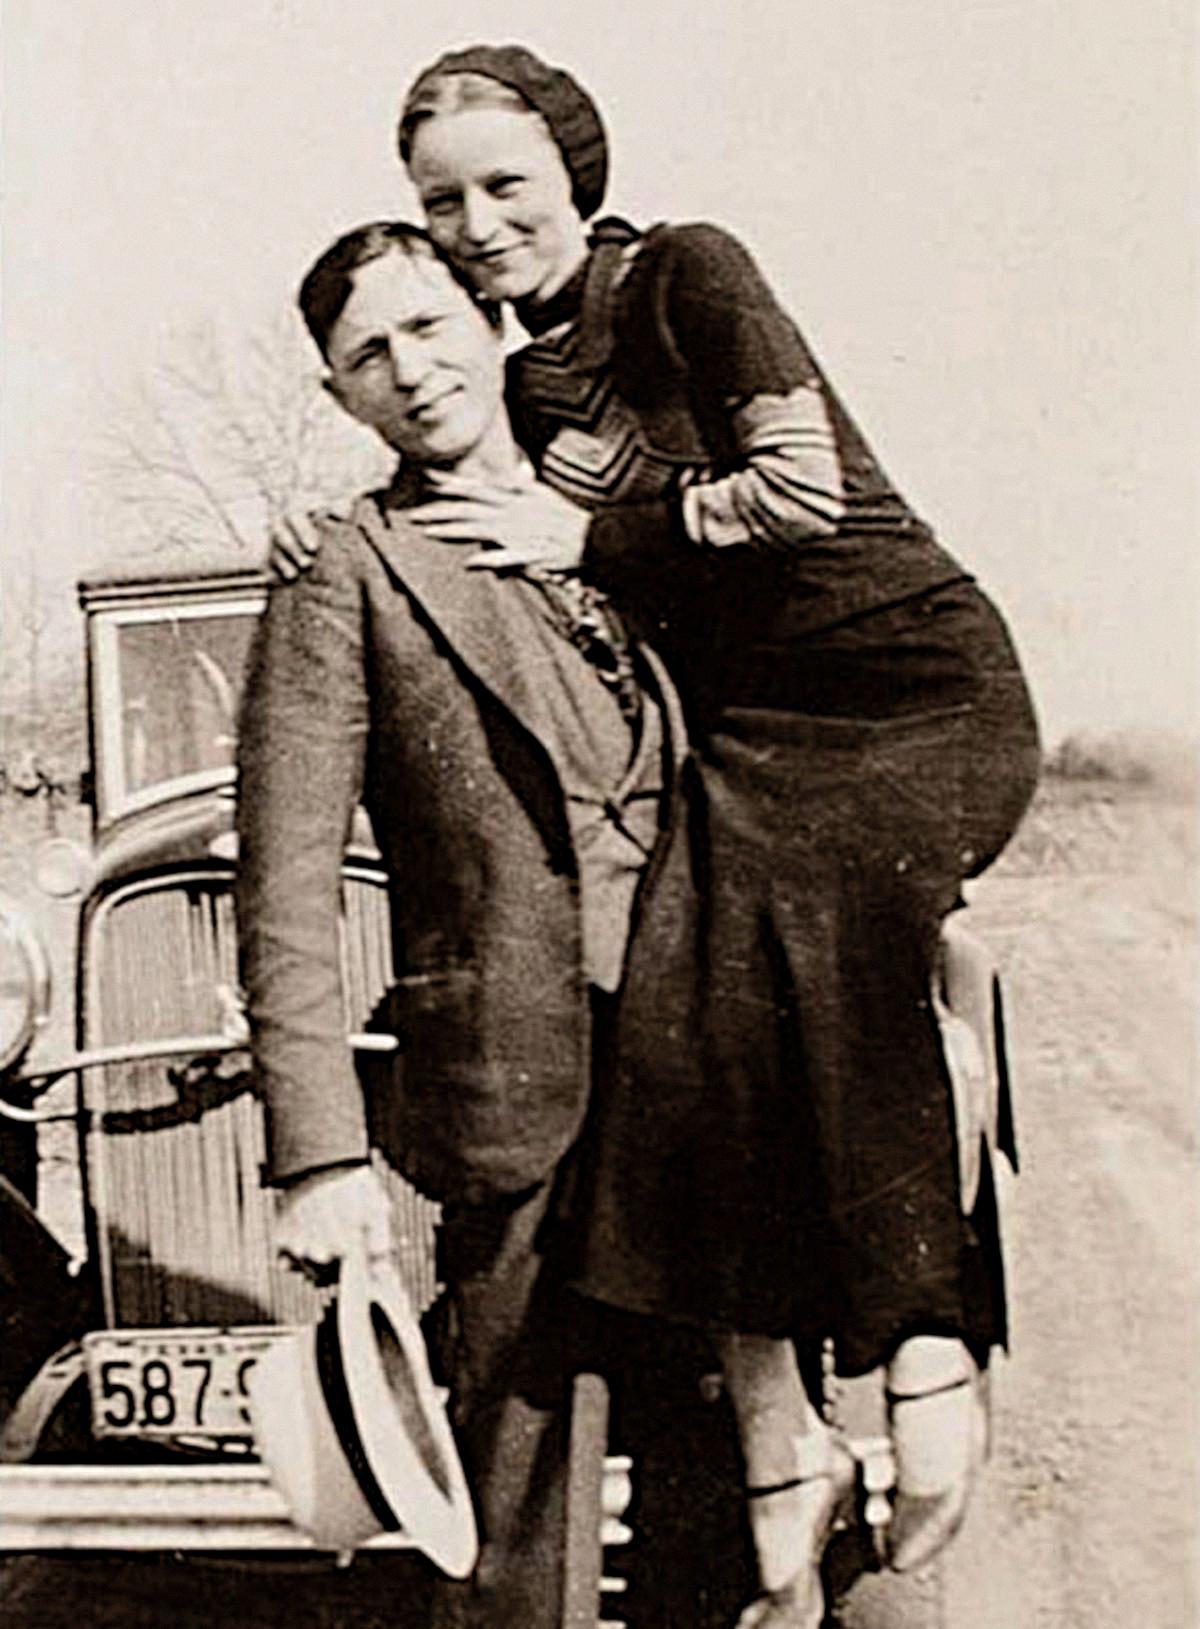 bonnie and clyde bodies inside car